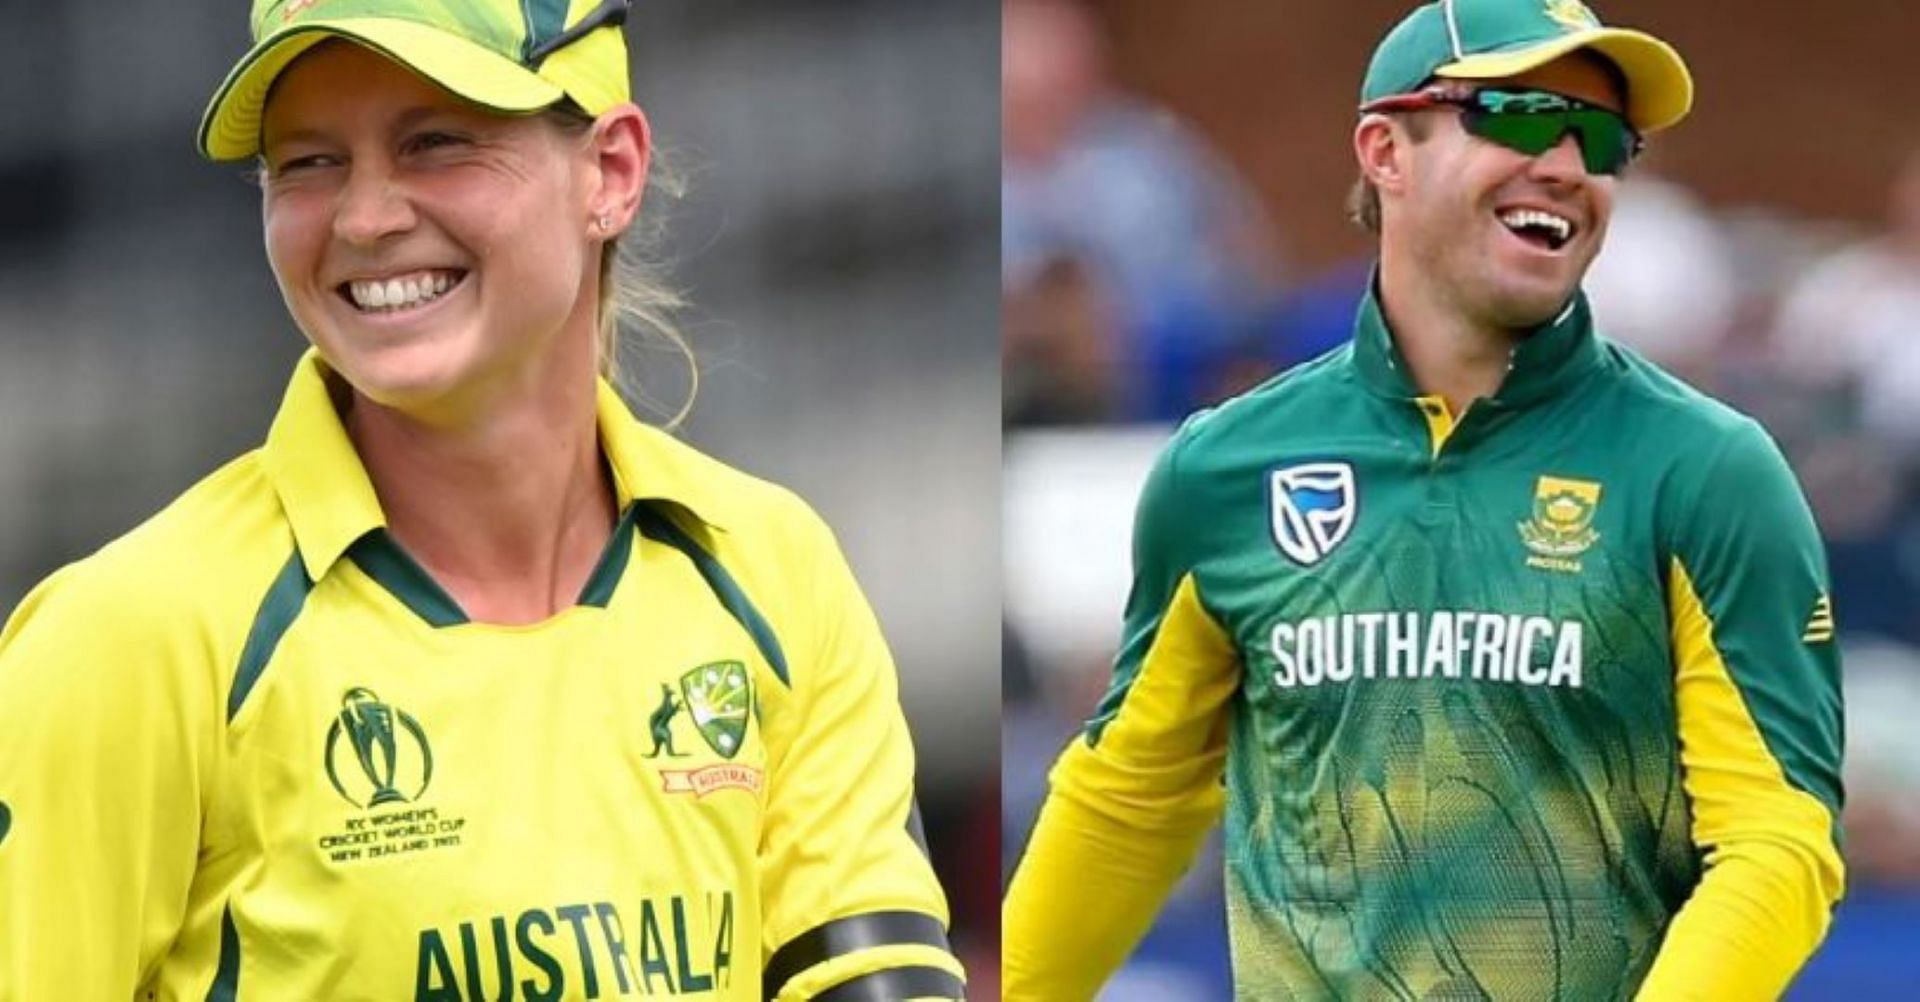 Meg Lanning and AB de Villiers were greats that called time earlier than expected